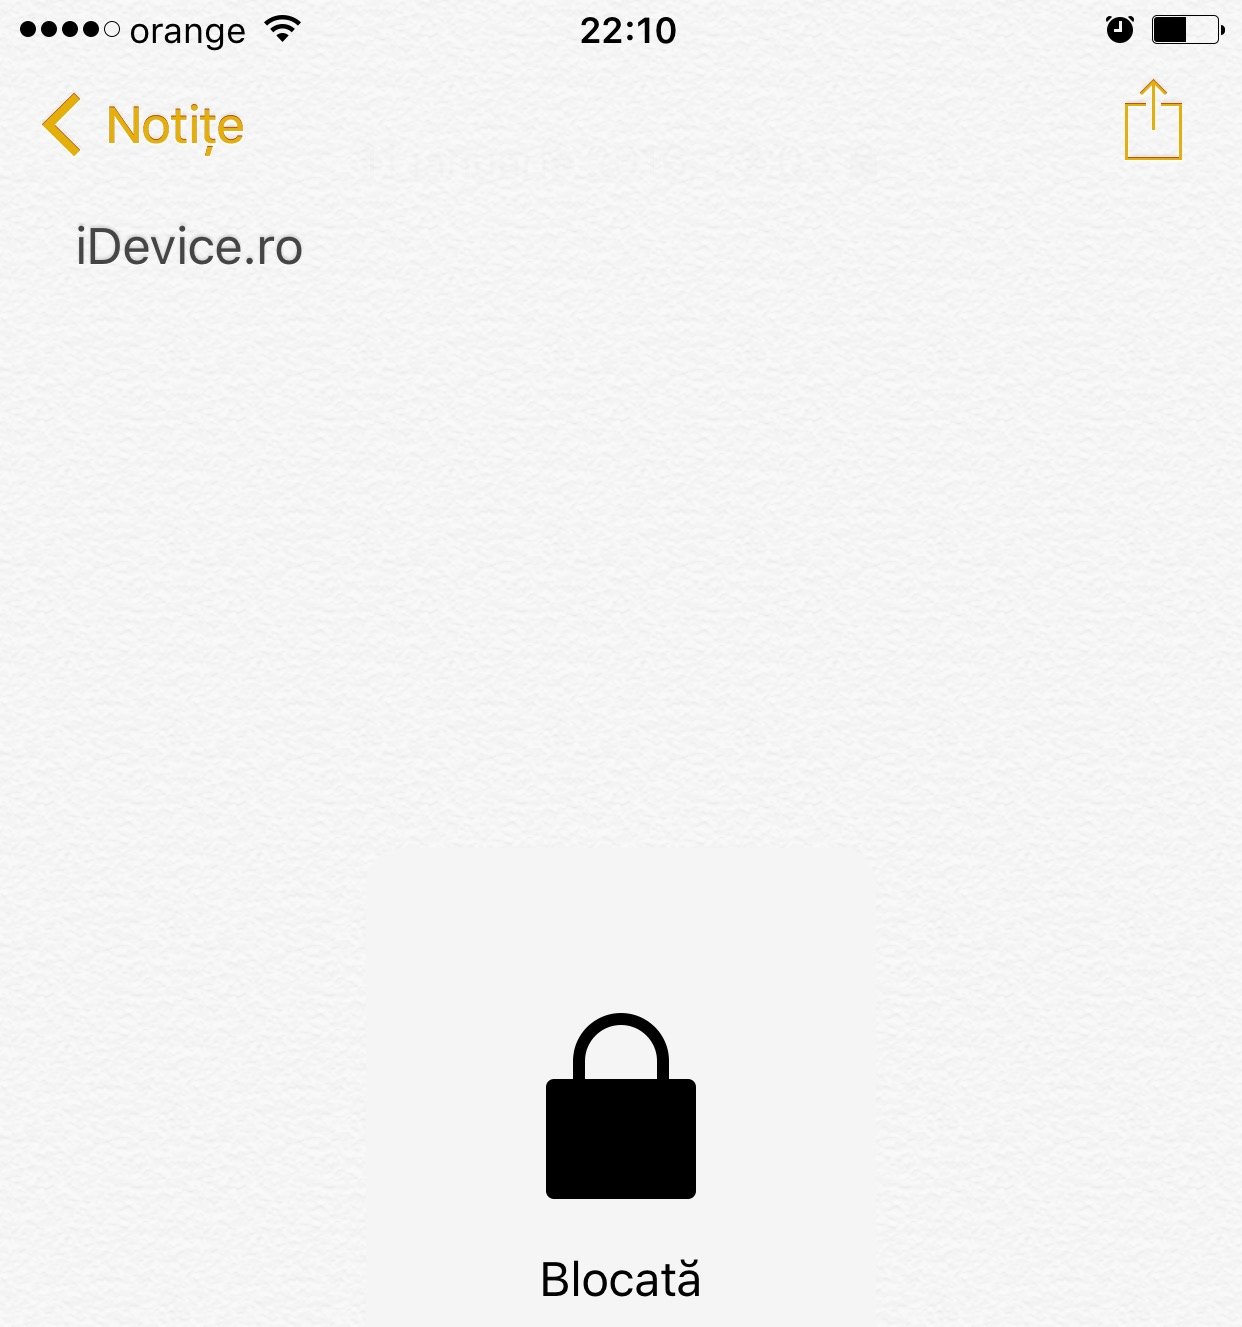 iOS 9.3 password protection notes 1